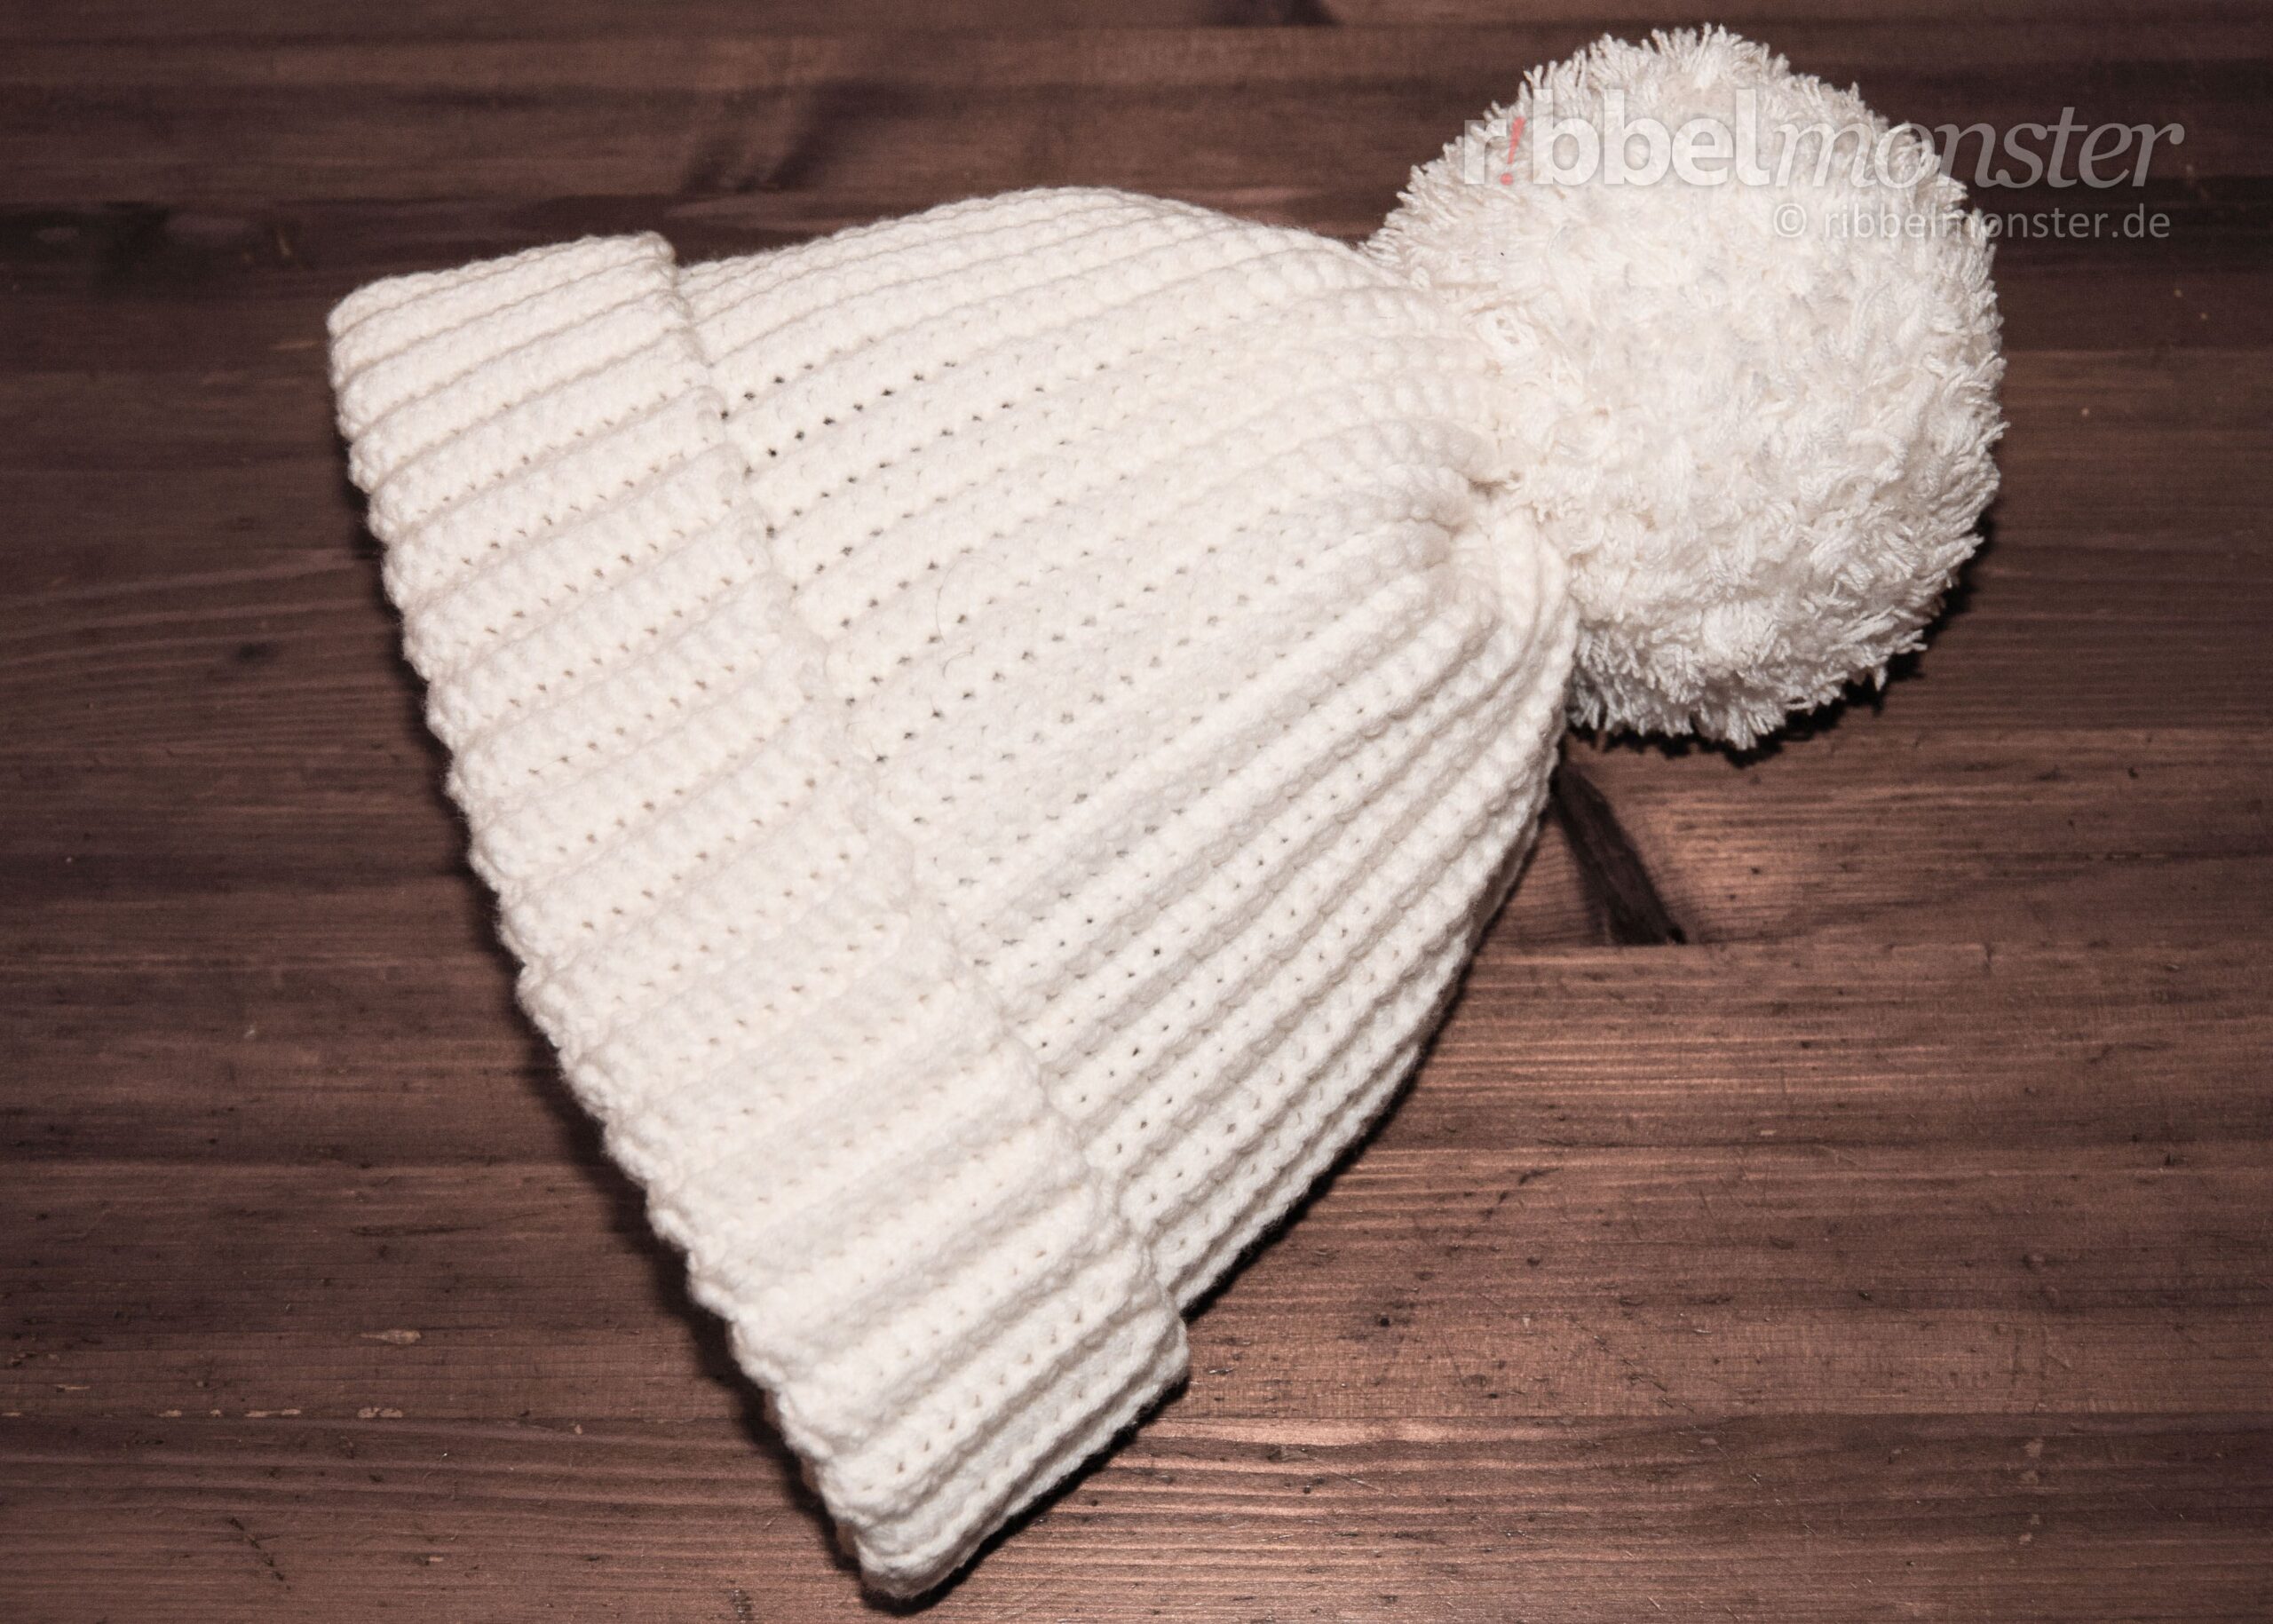 Crochet Simple Hat without Increases & Decreases